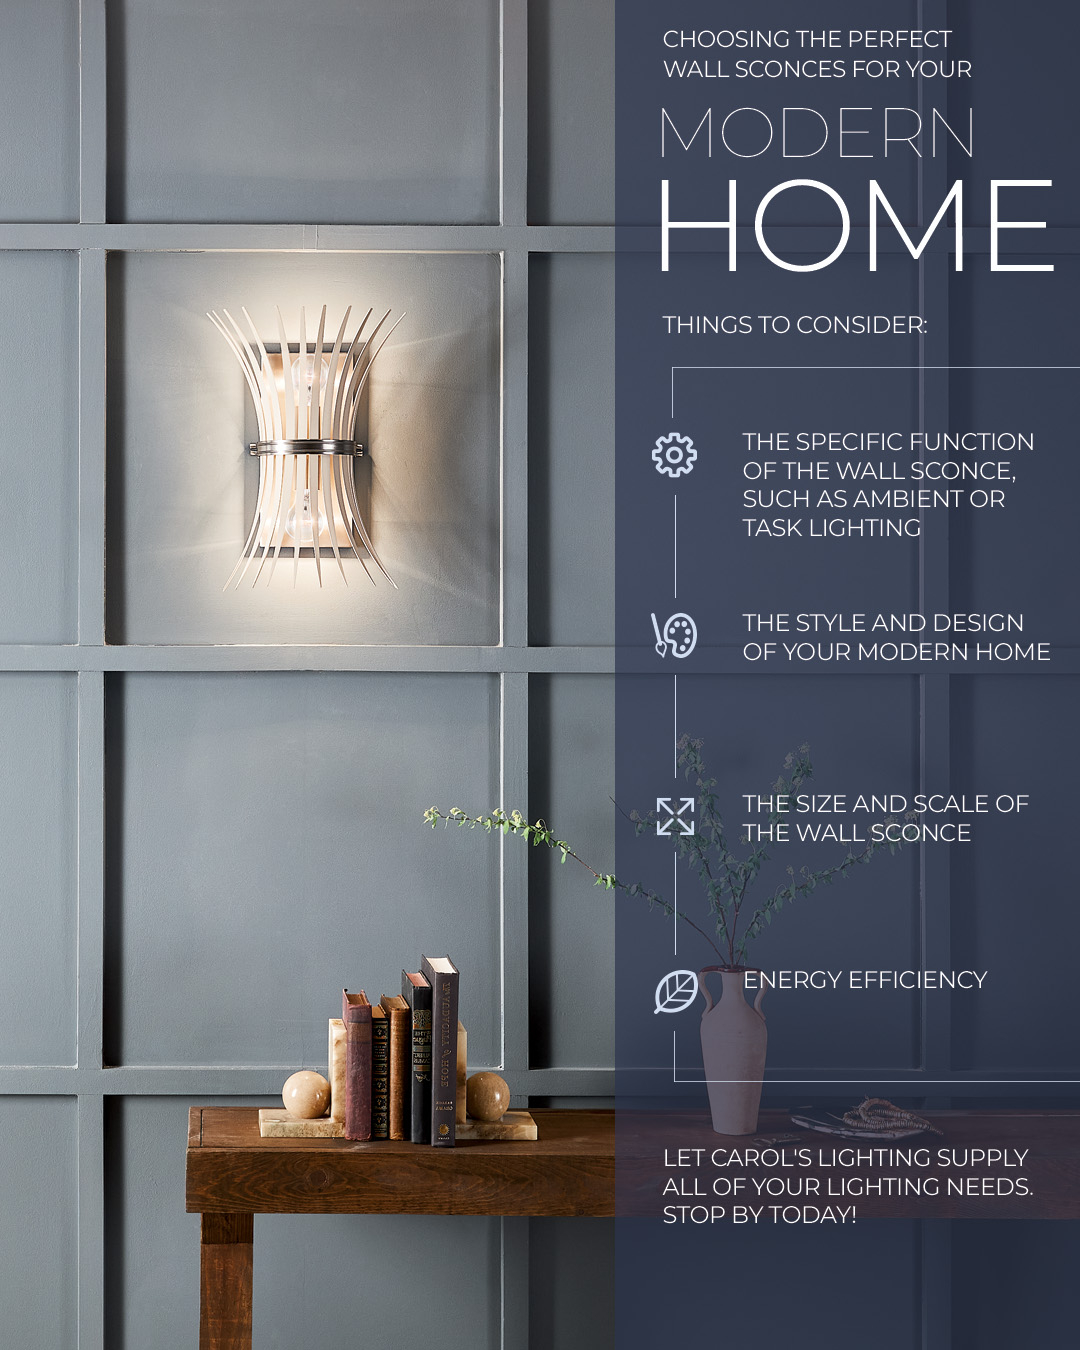 Choosing the Perfect Wall Sconces for Your Modern Home